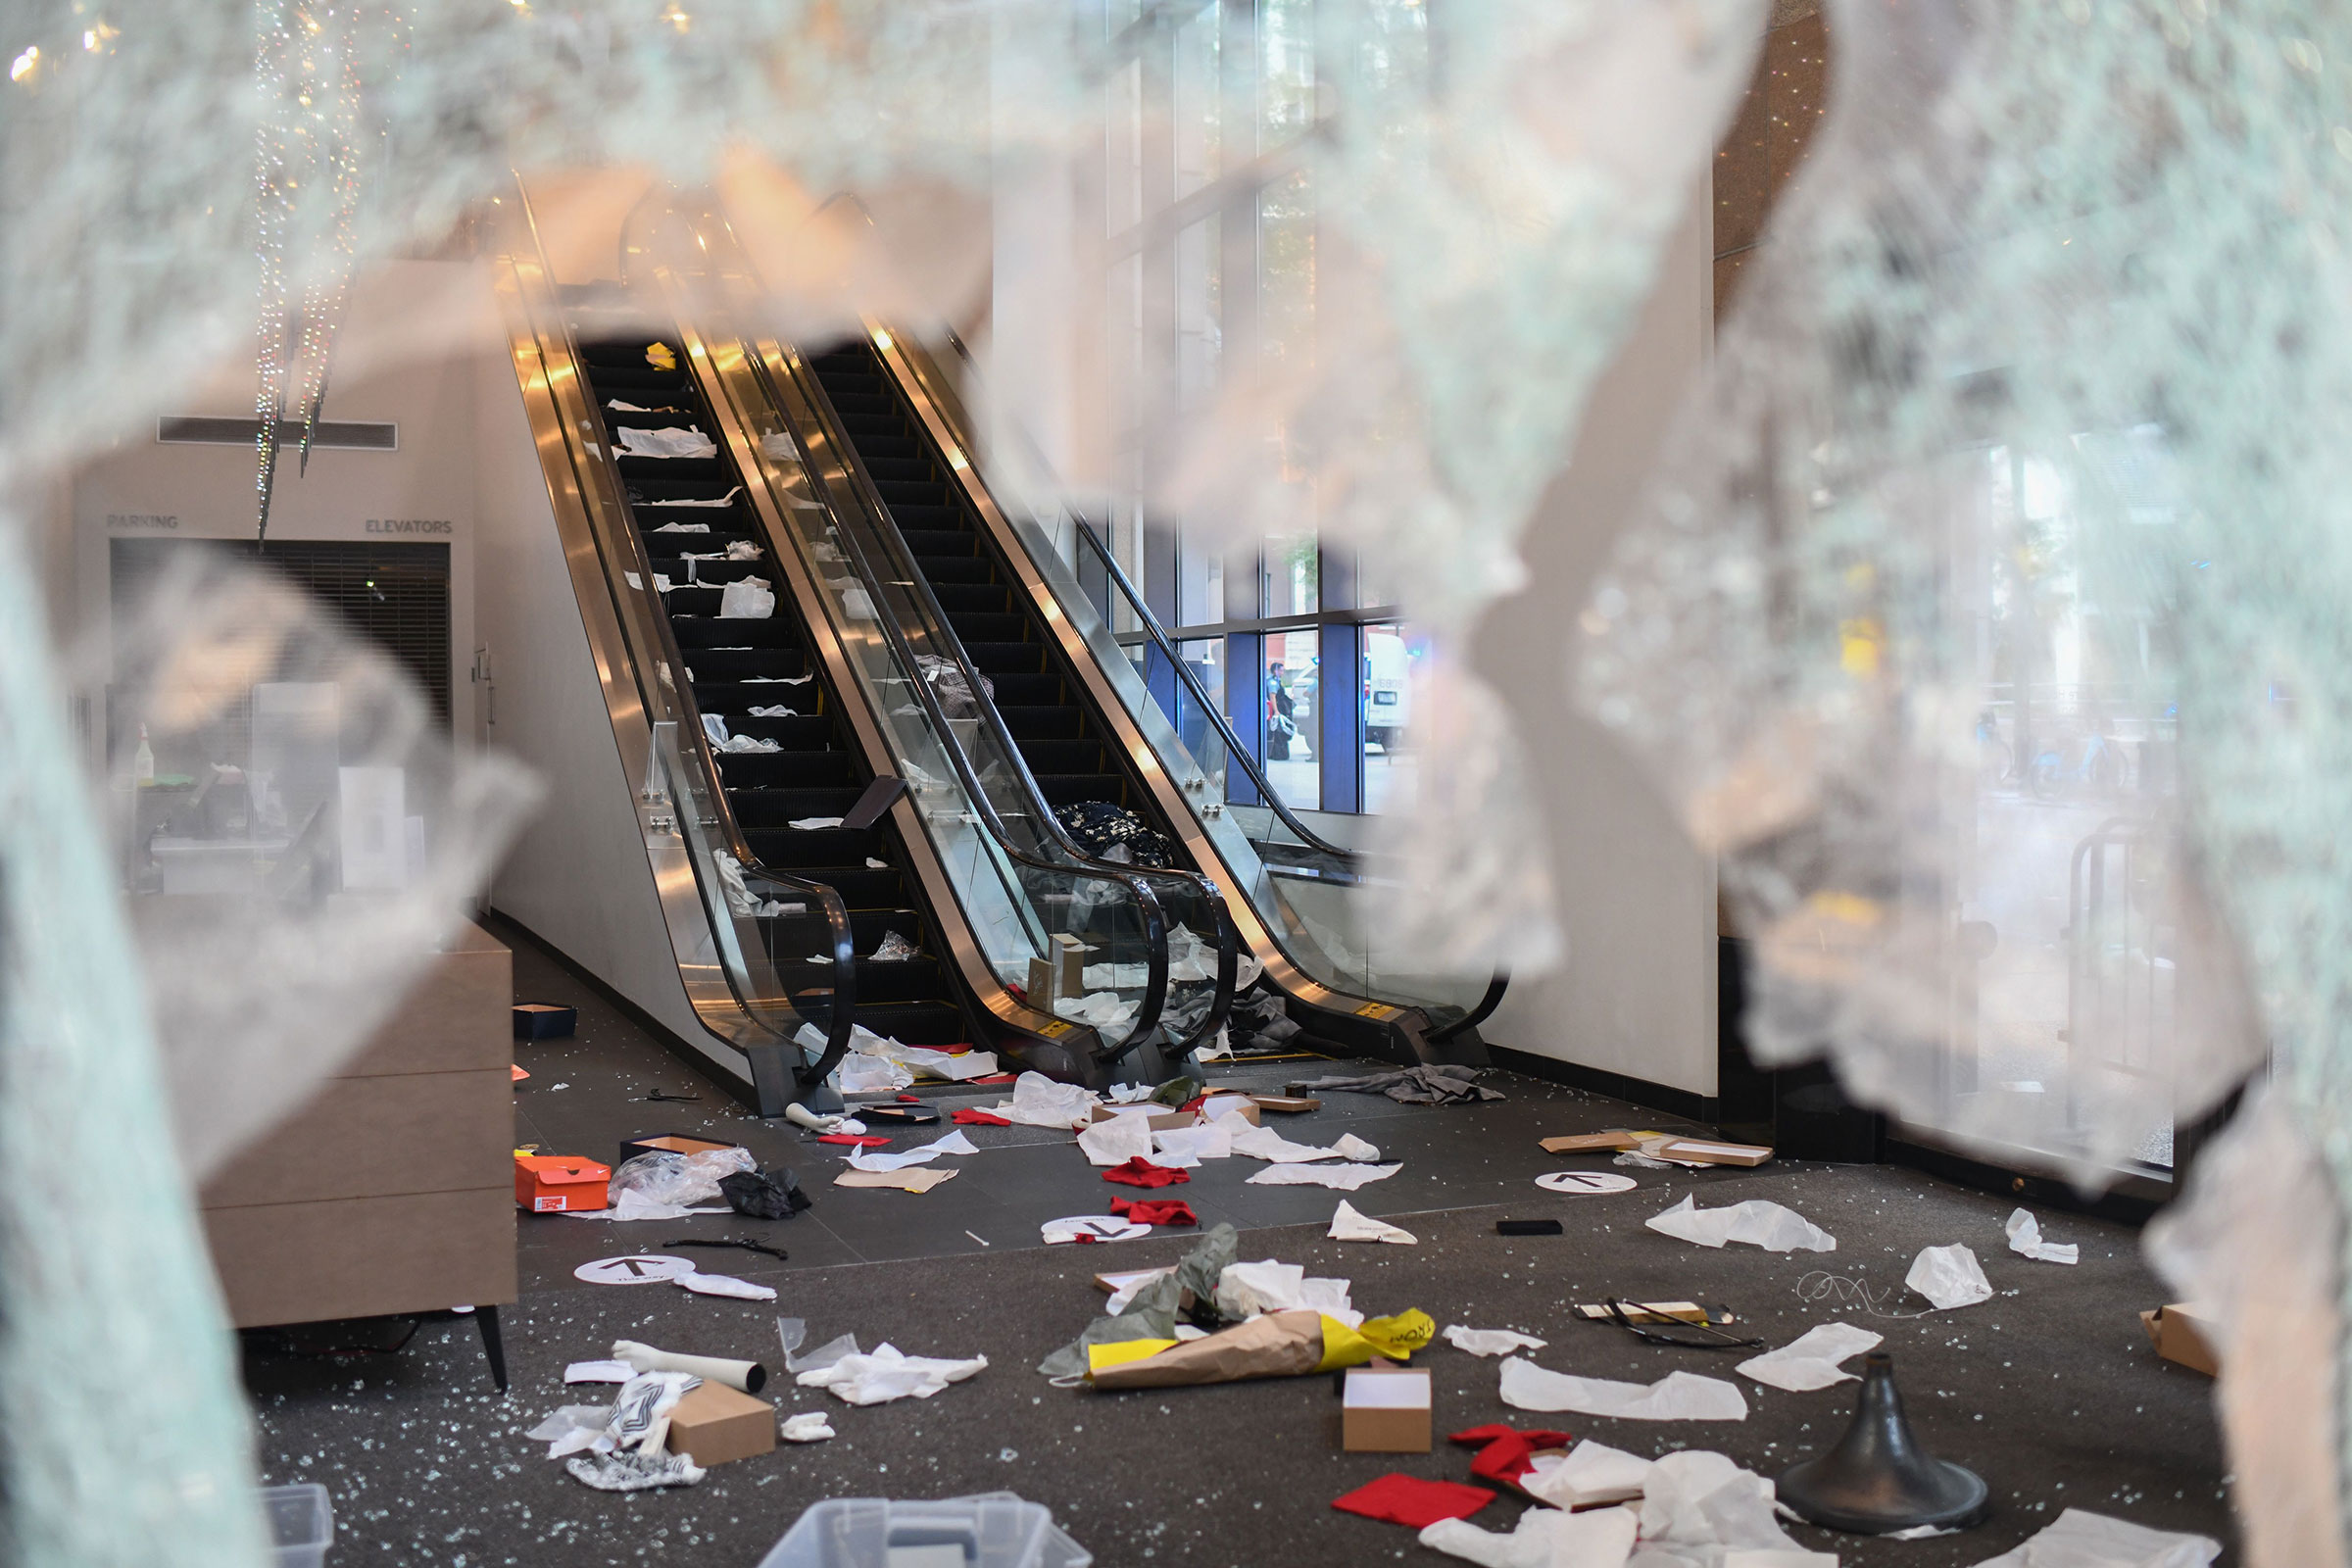 The aftermath seen at the store Nordstrom on Aug. 10, 2020, following a night of unrest in Chicago.